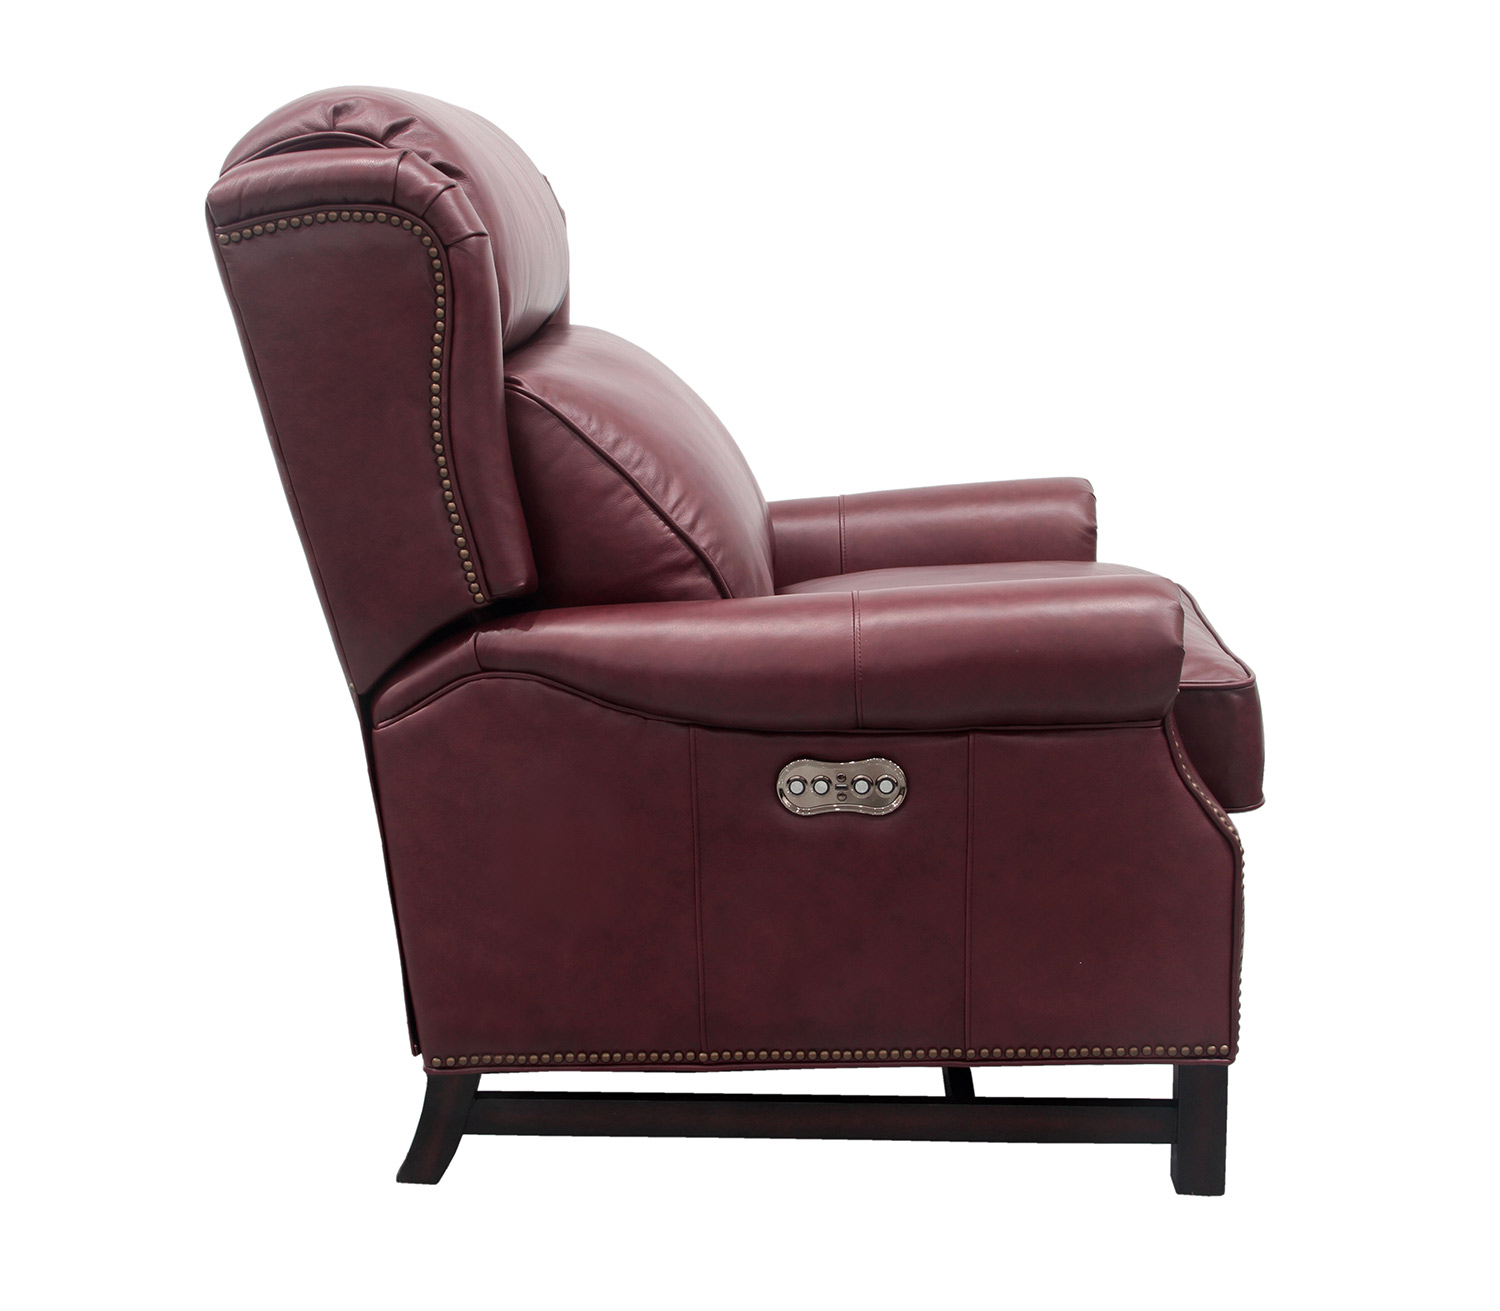 Barcalounger Thornfield Power Recliner Chair with Power Head Rest - Shoreham Wine/All Leather